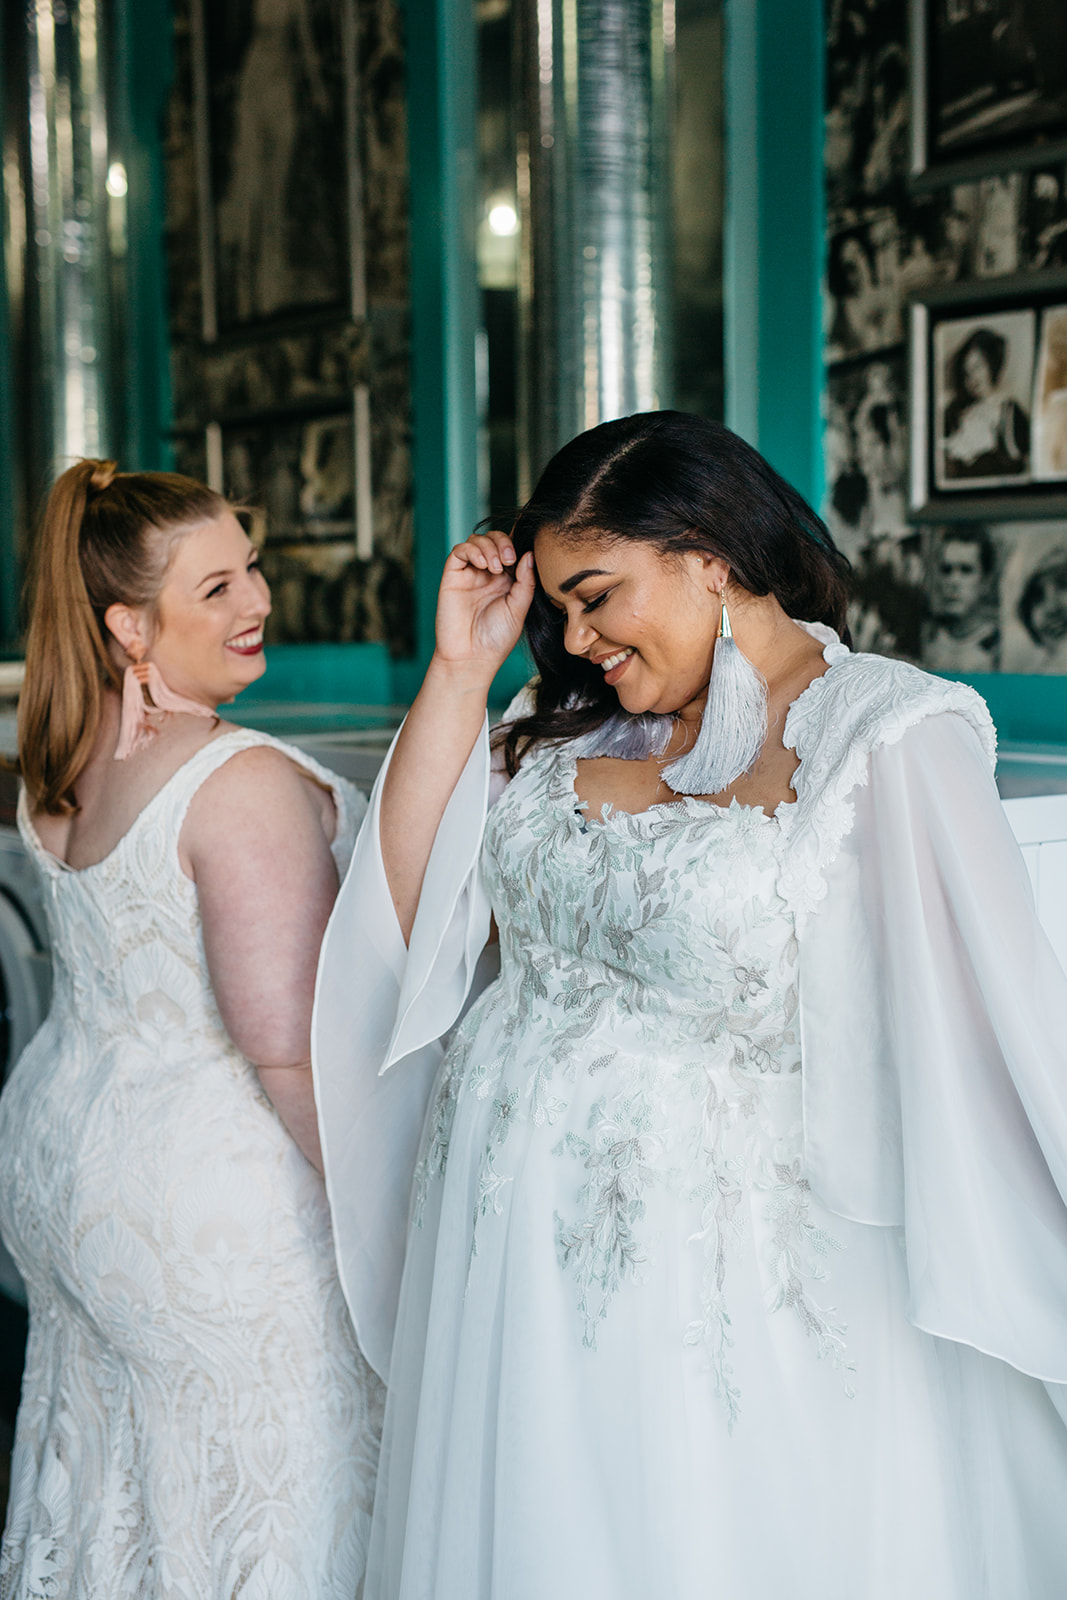 two models laughing wearing plus size wedding gowns from the a practical wedding lace & liberty plus size wedding dress collection